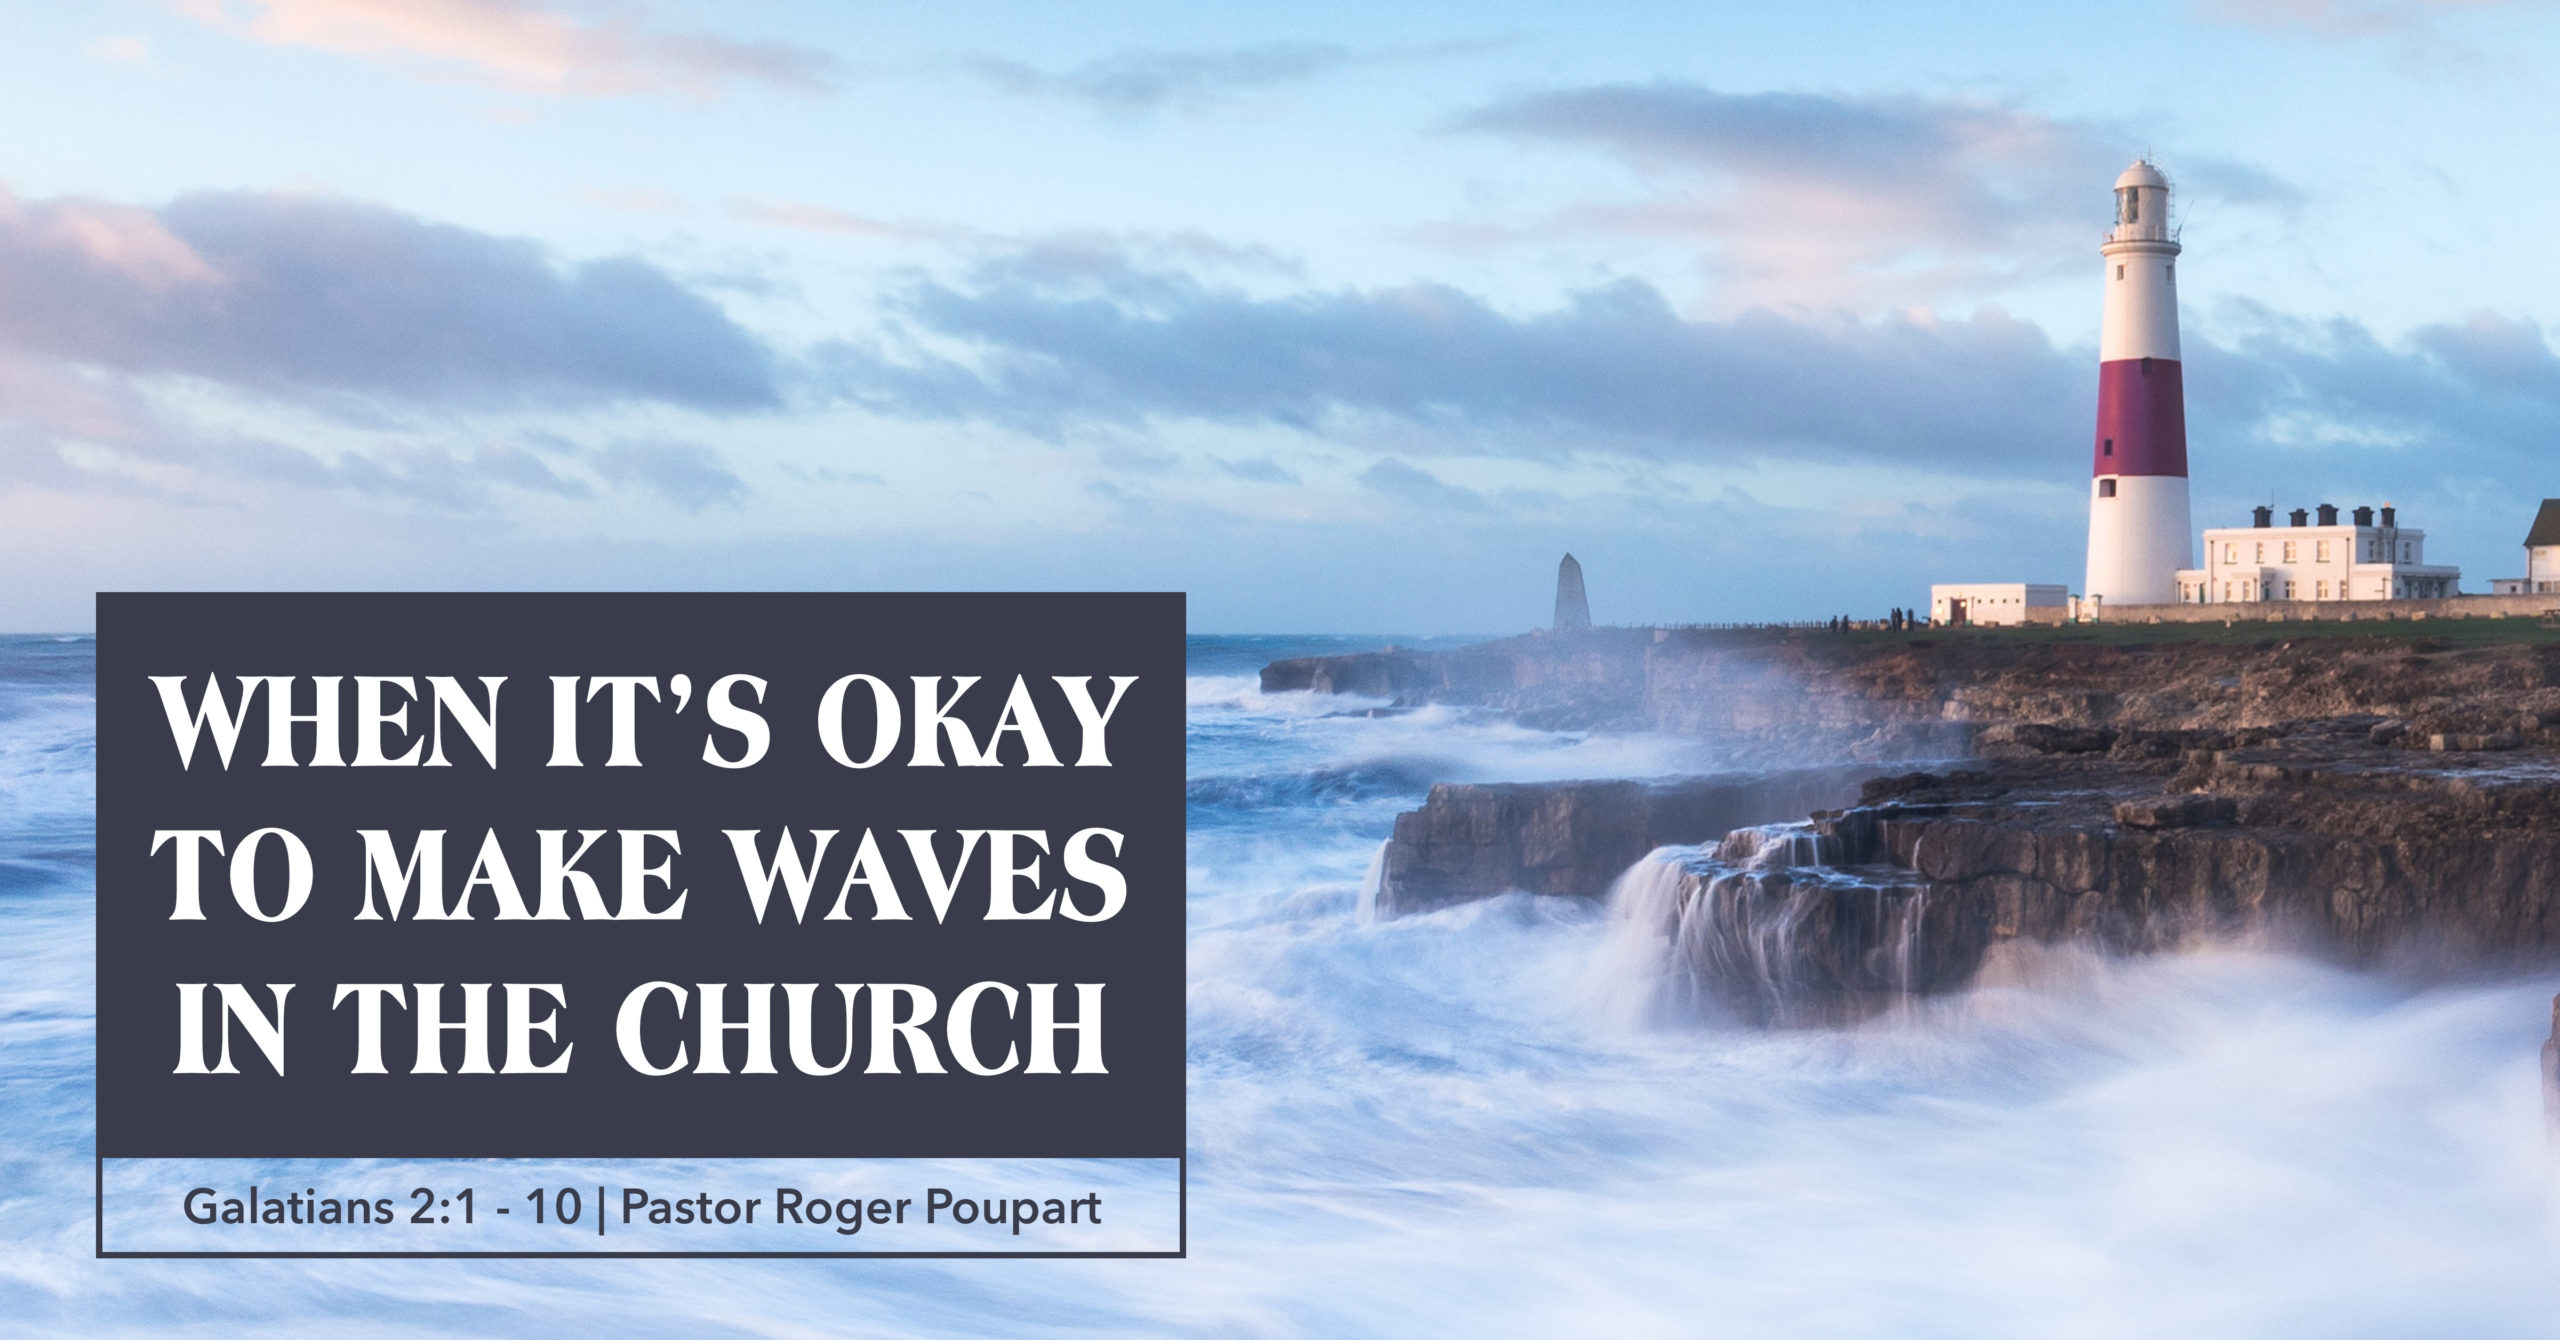 When It's Okay to Make Waves in the Church